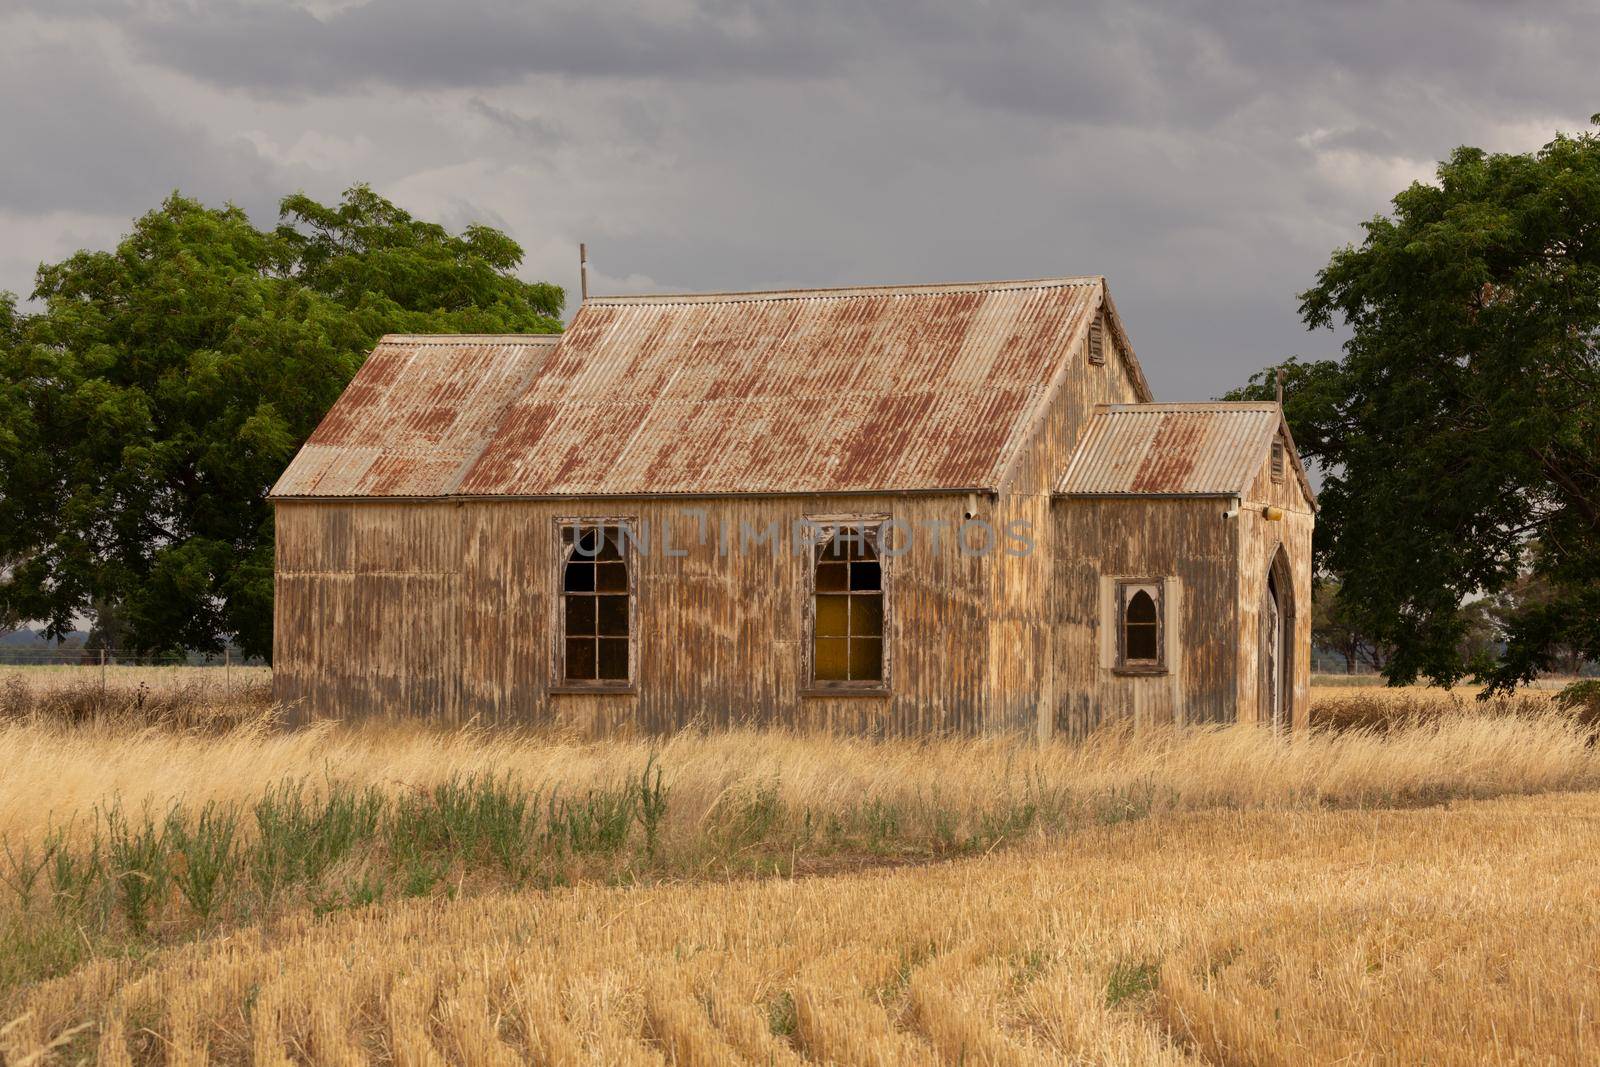 Rustic old abandoned church in rural NSW Australia by lovleah